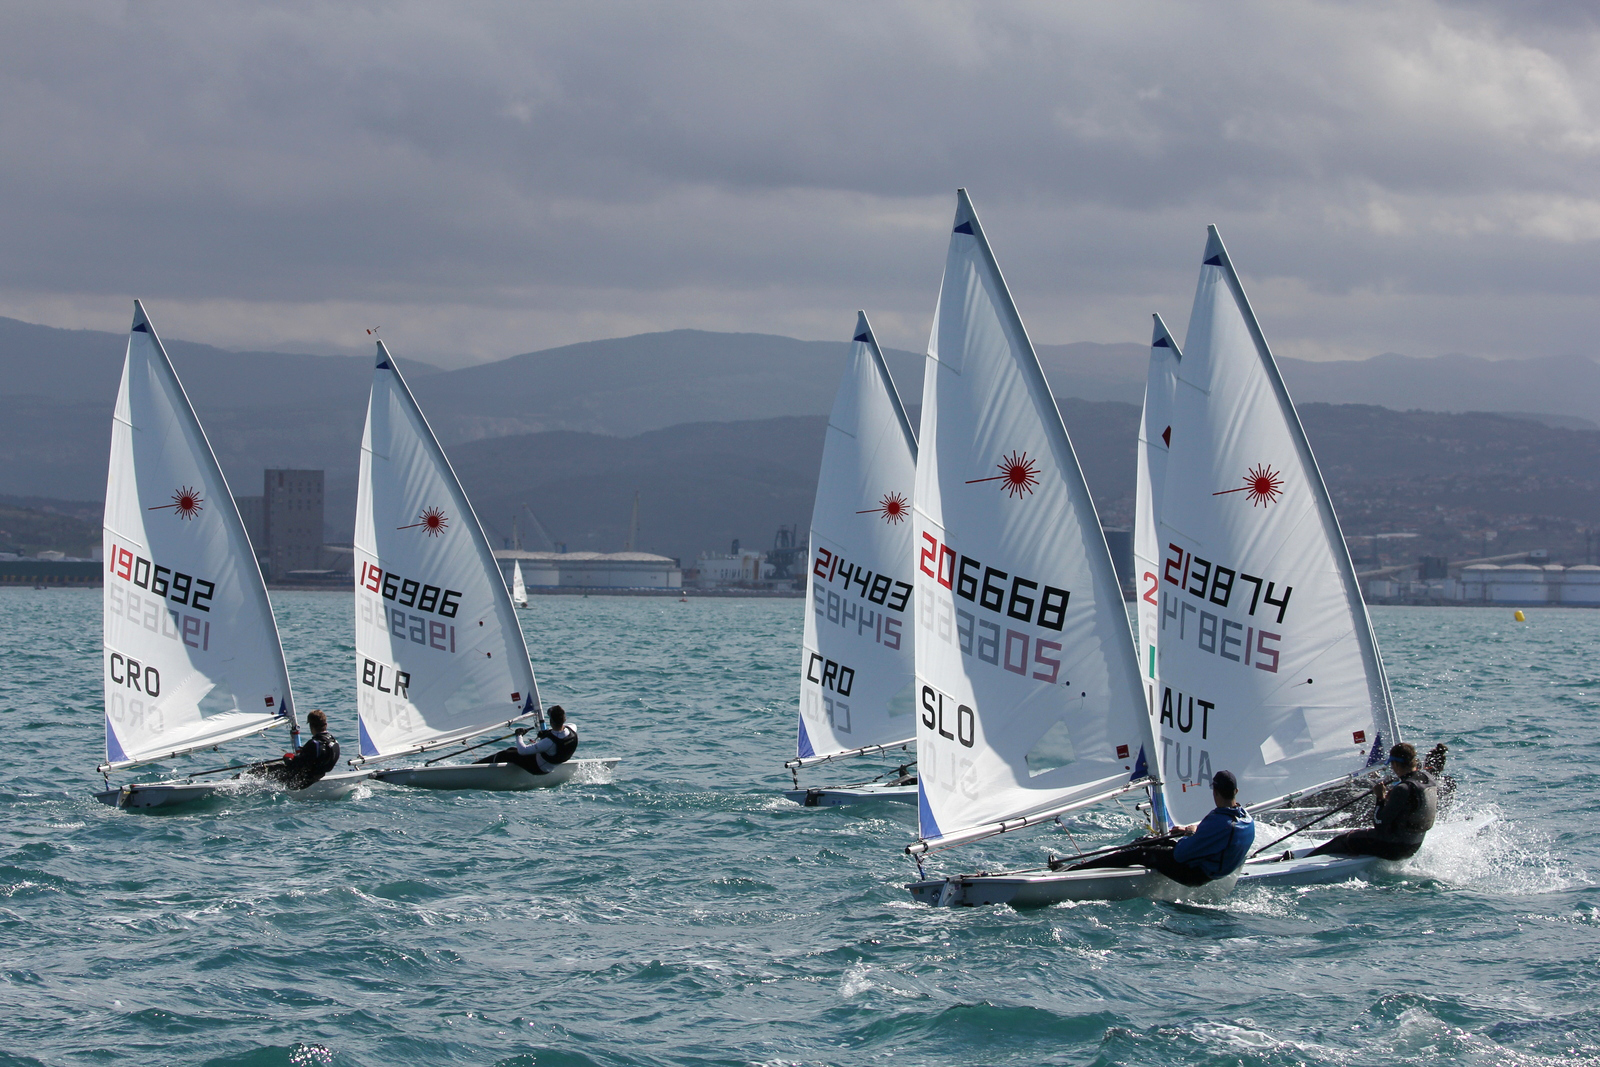  Laser  Europacup 2019  Act 1  Koper SLO  Final results, the Swiss